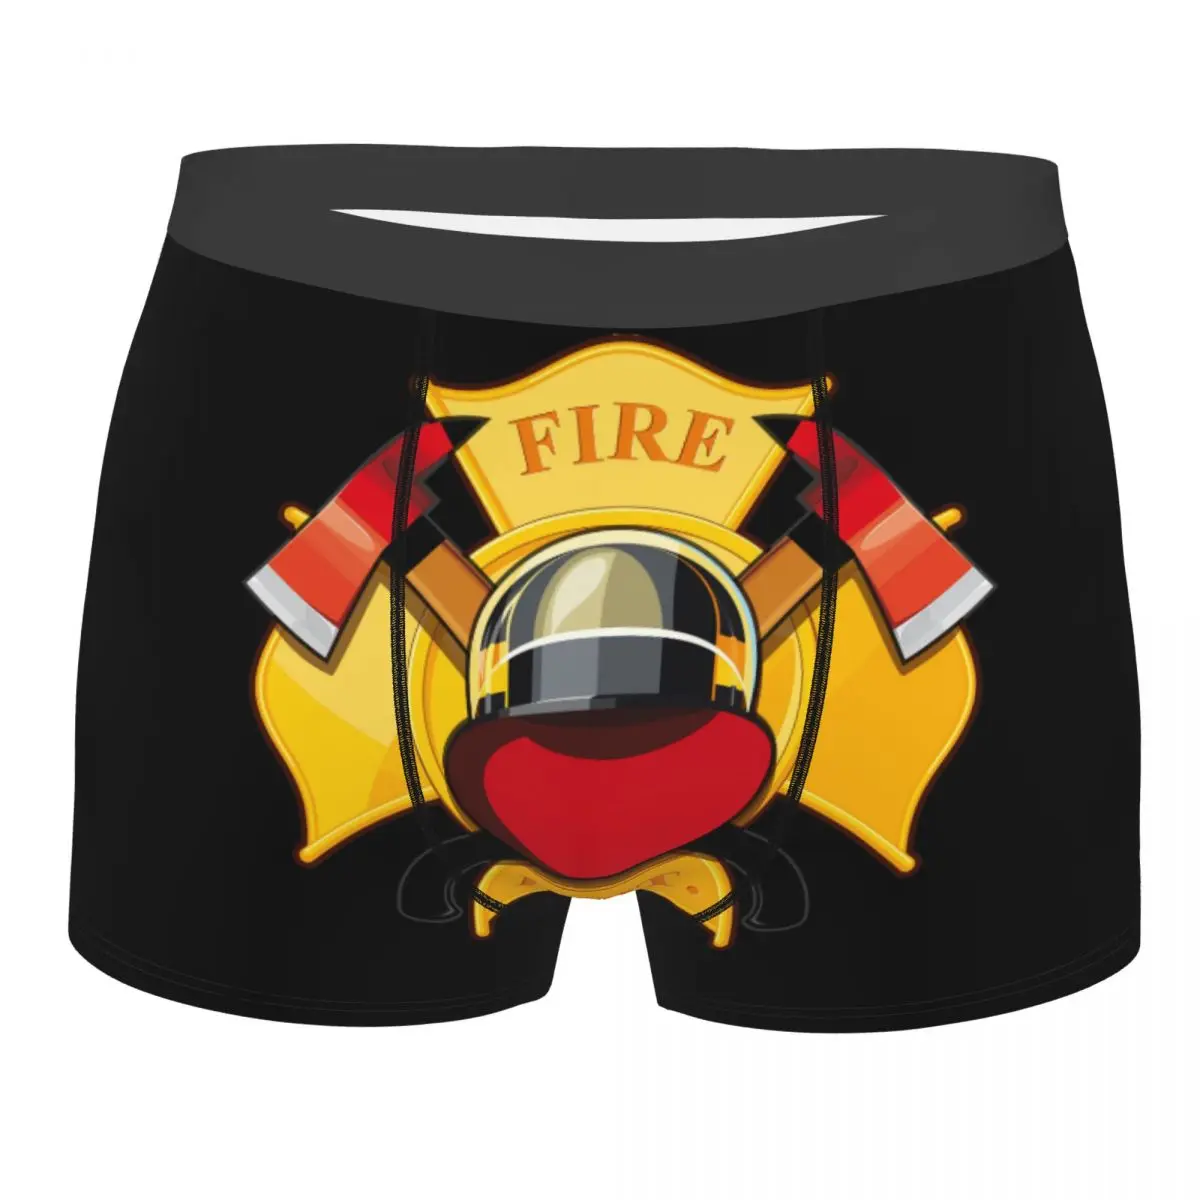 firefighter Fire Department Badge Mencosy Boxer Briefs Underpants Highly Breathable High Quality Birthday Gifts red fire department badge men women socks firefighter windproof beautiful suitable for all seasons dressing gifts